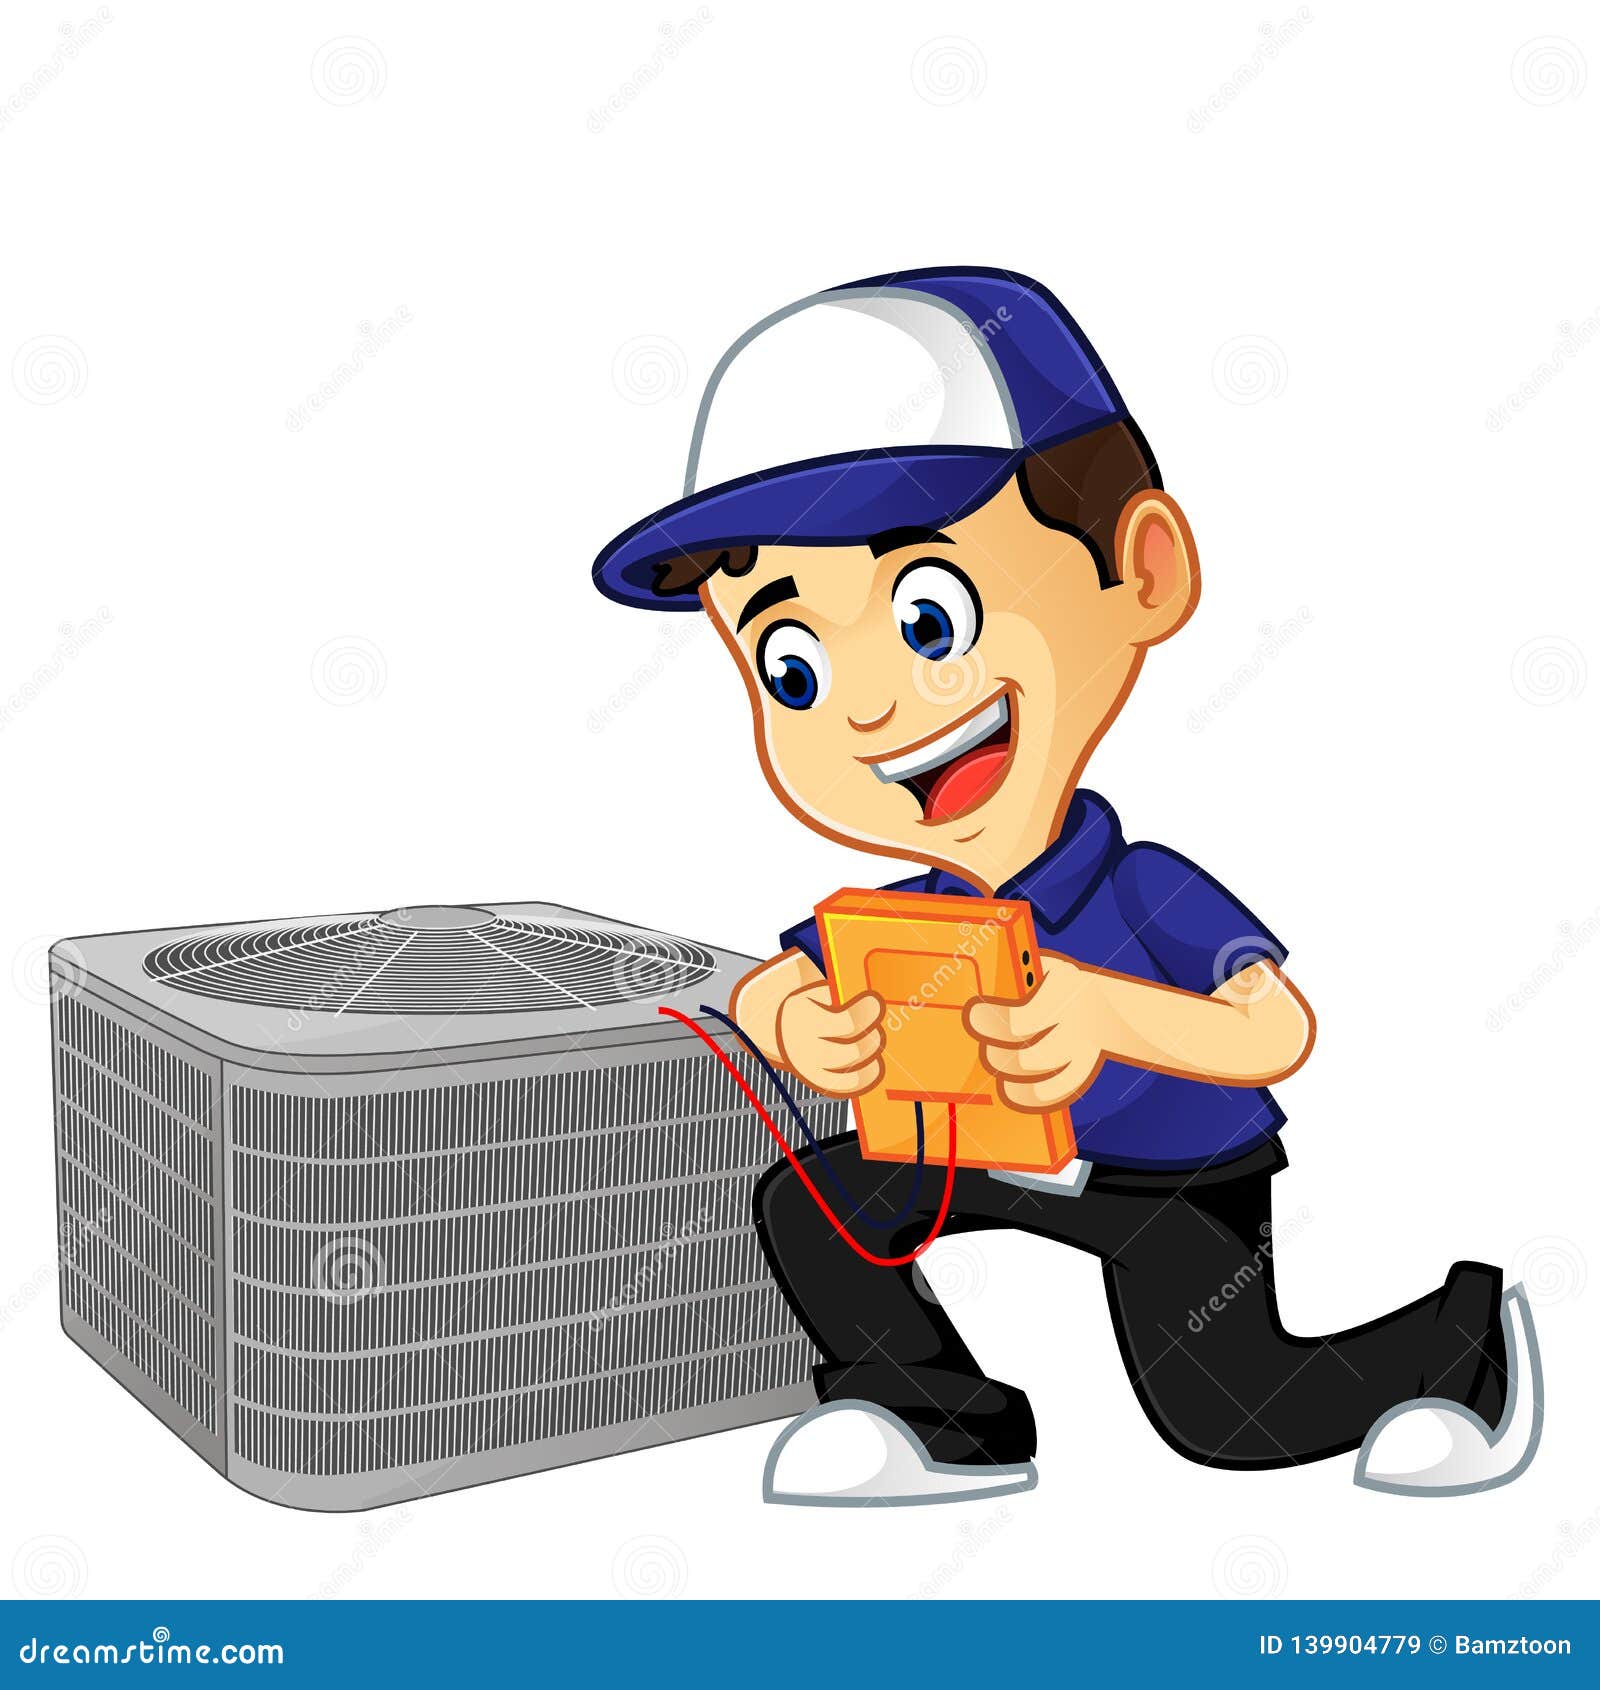 Hvac Cartoons, Illustrations & Vector Stock Images - 3557 Pictures to